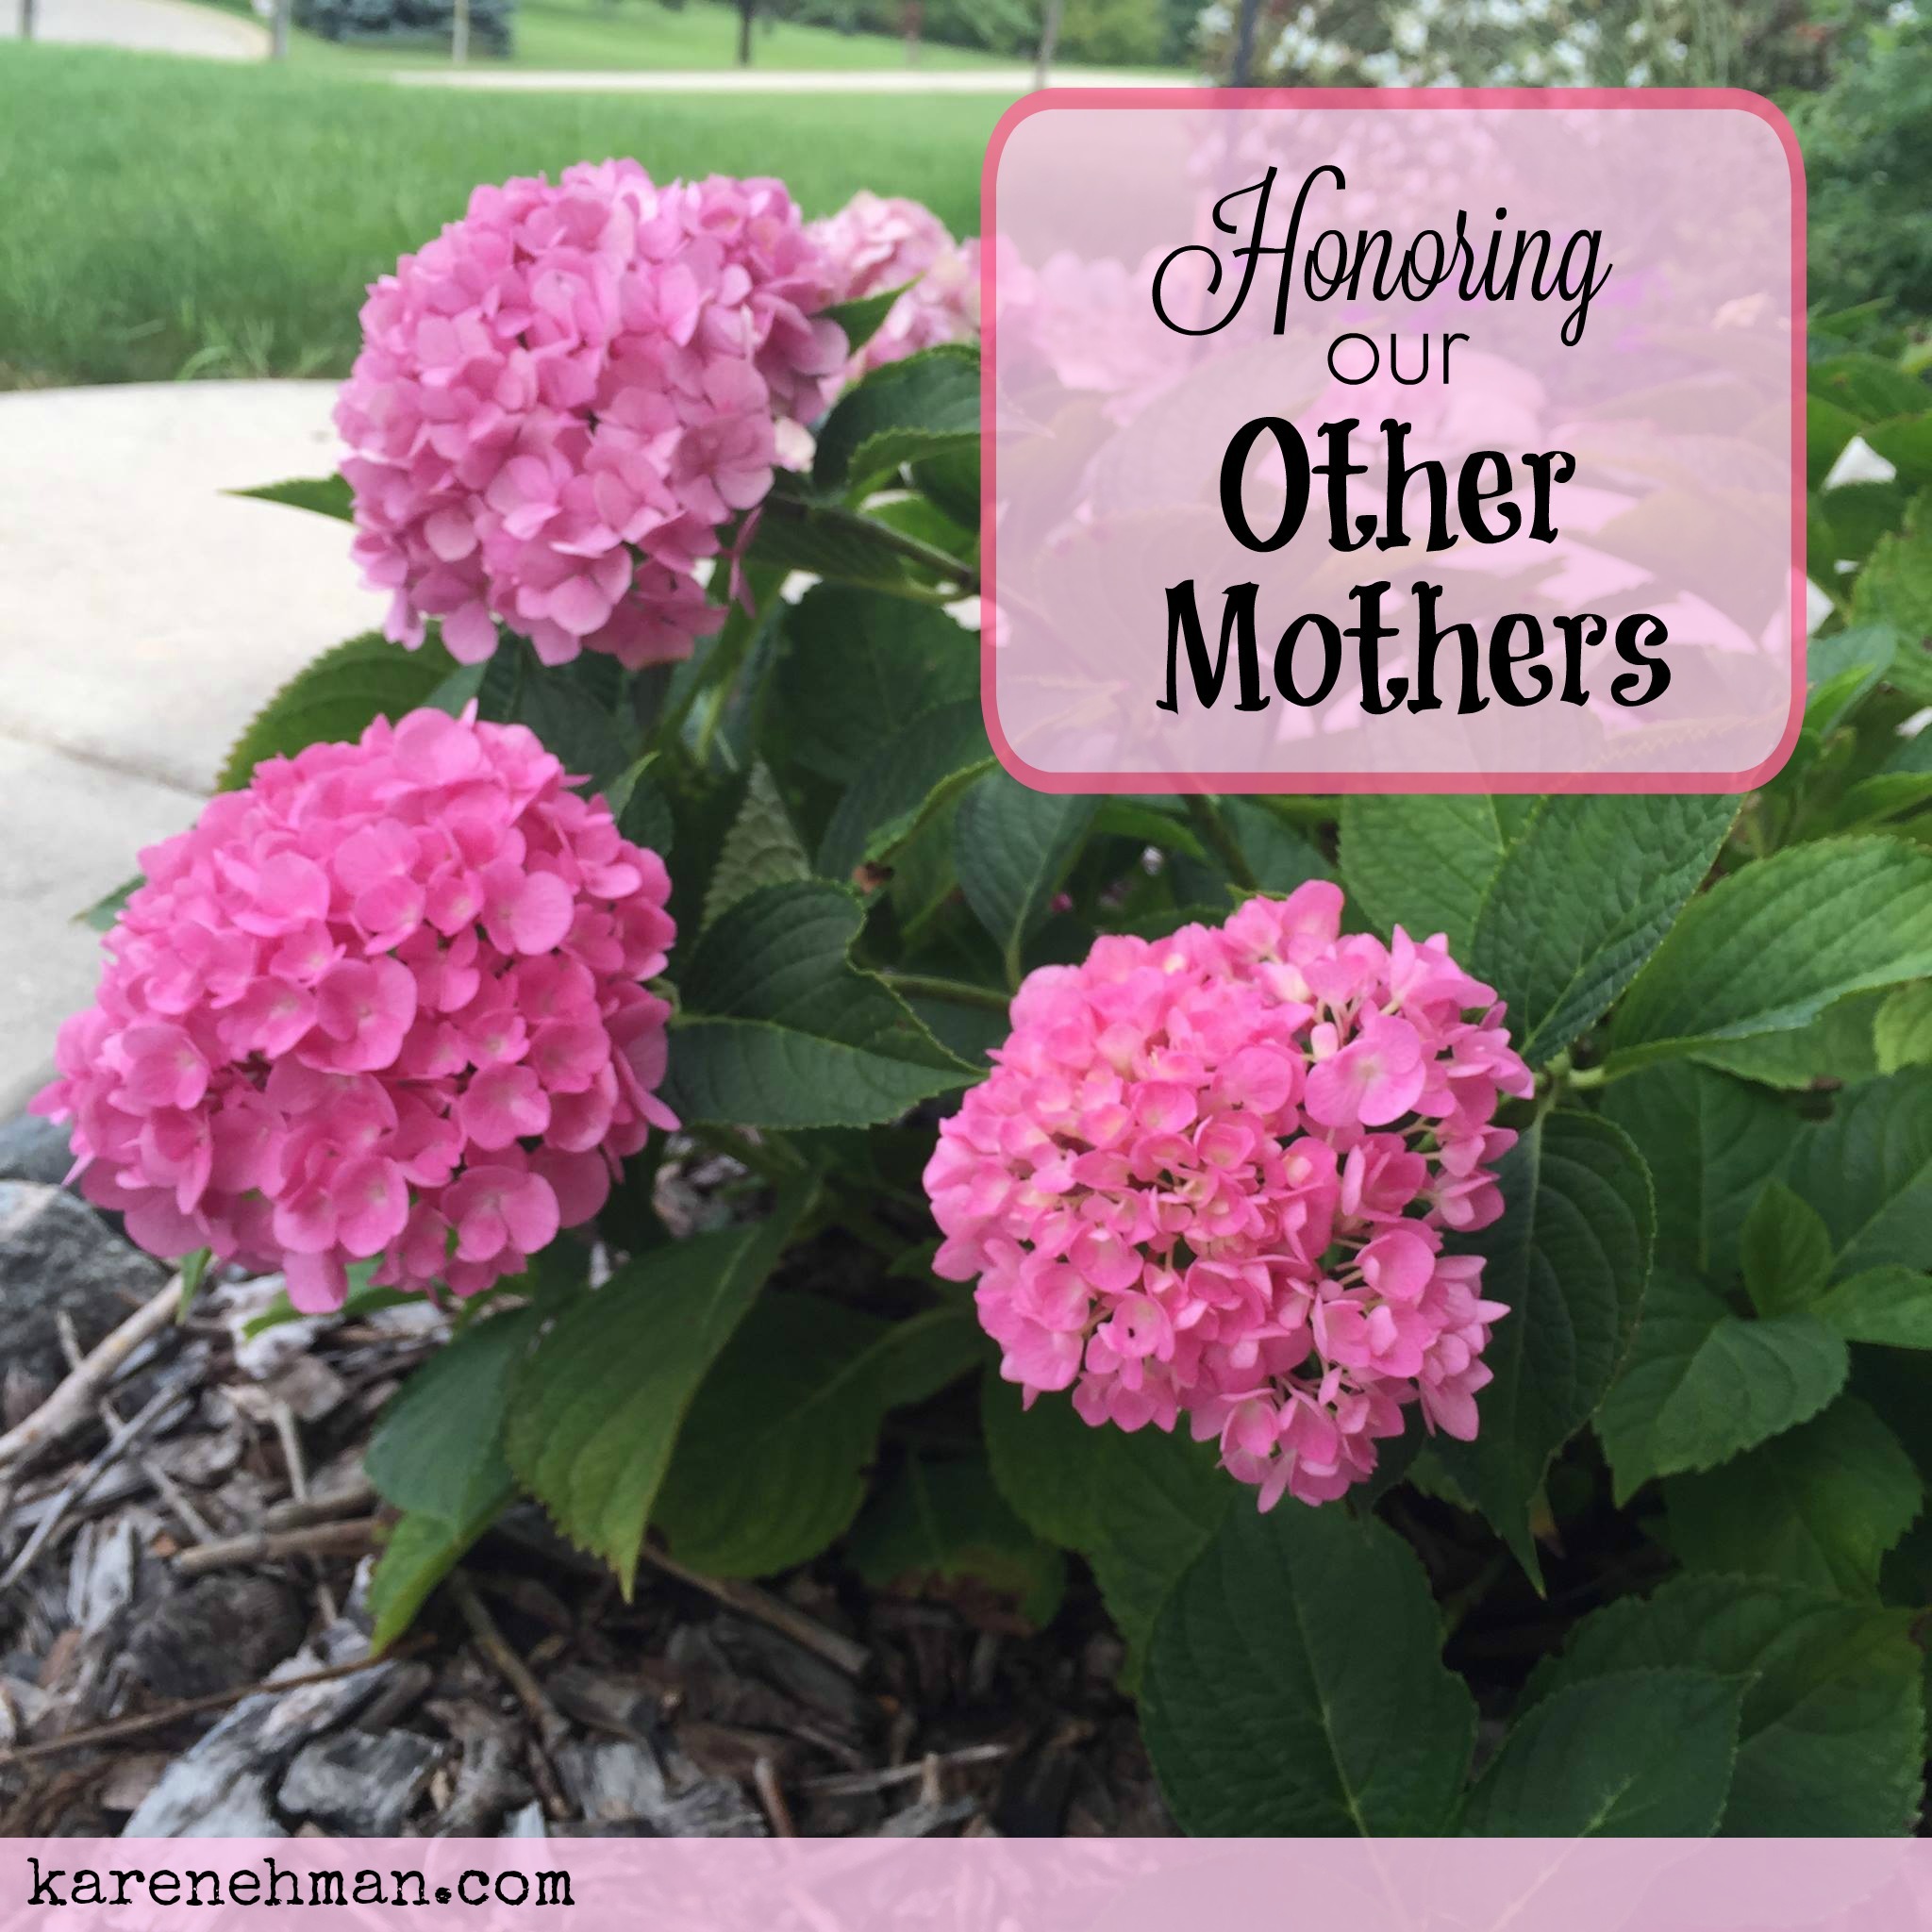 This Mothers Day, don't forget your "Other Mothers" {karenehman.com}